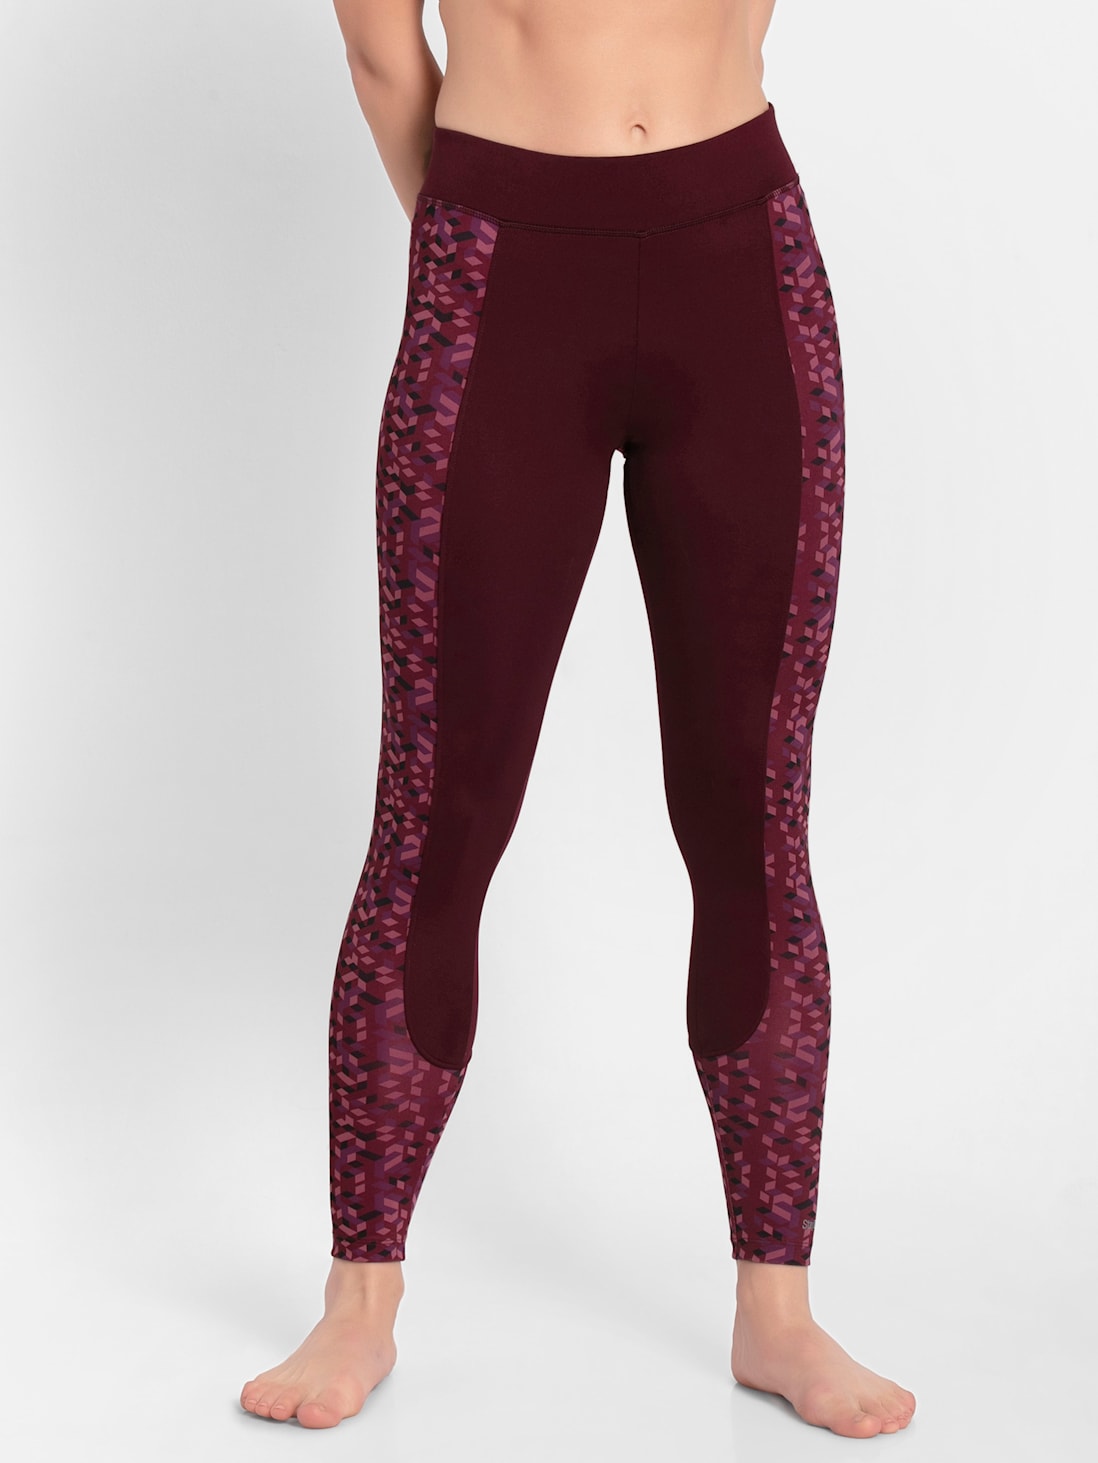 Buy Women's Super Combed Cotton Elastane Stretch Yoga Pants with Side  Zipper Pockets - Ruby Pink Marl AA01 | Jockey India